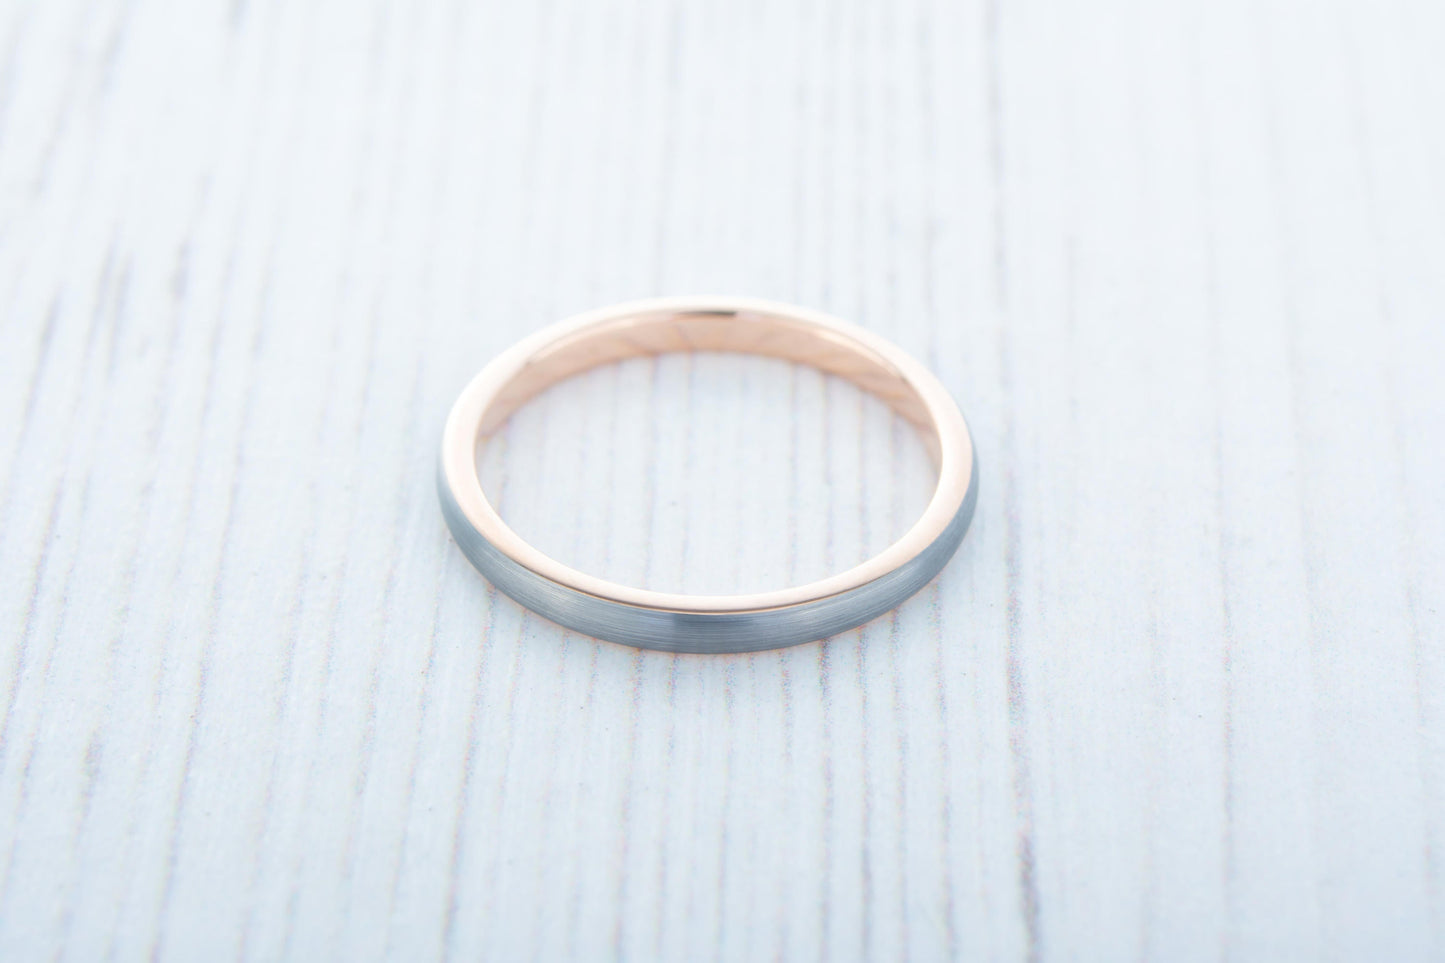 2mm 14K Rose Gold and Brushed Titanium Wedding ring band for men and women